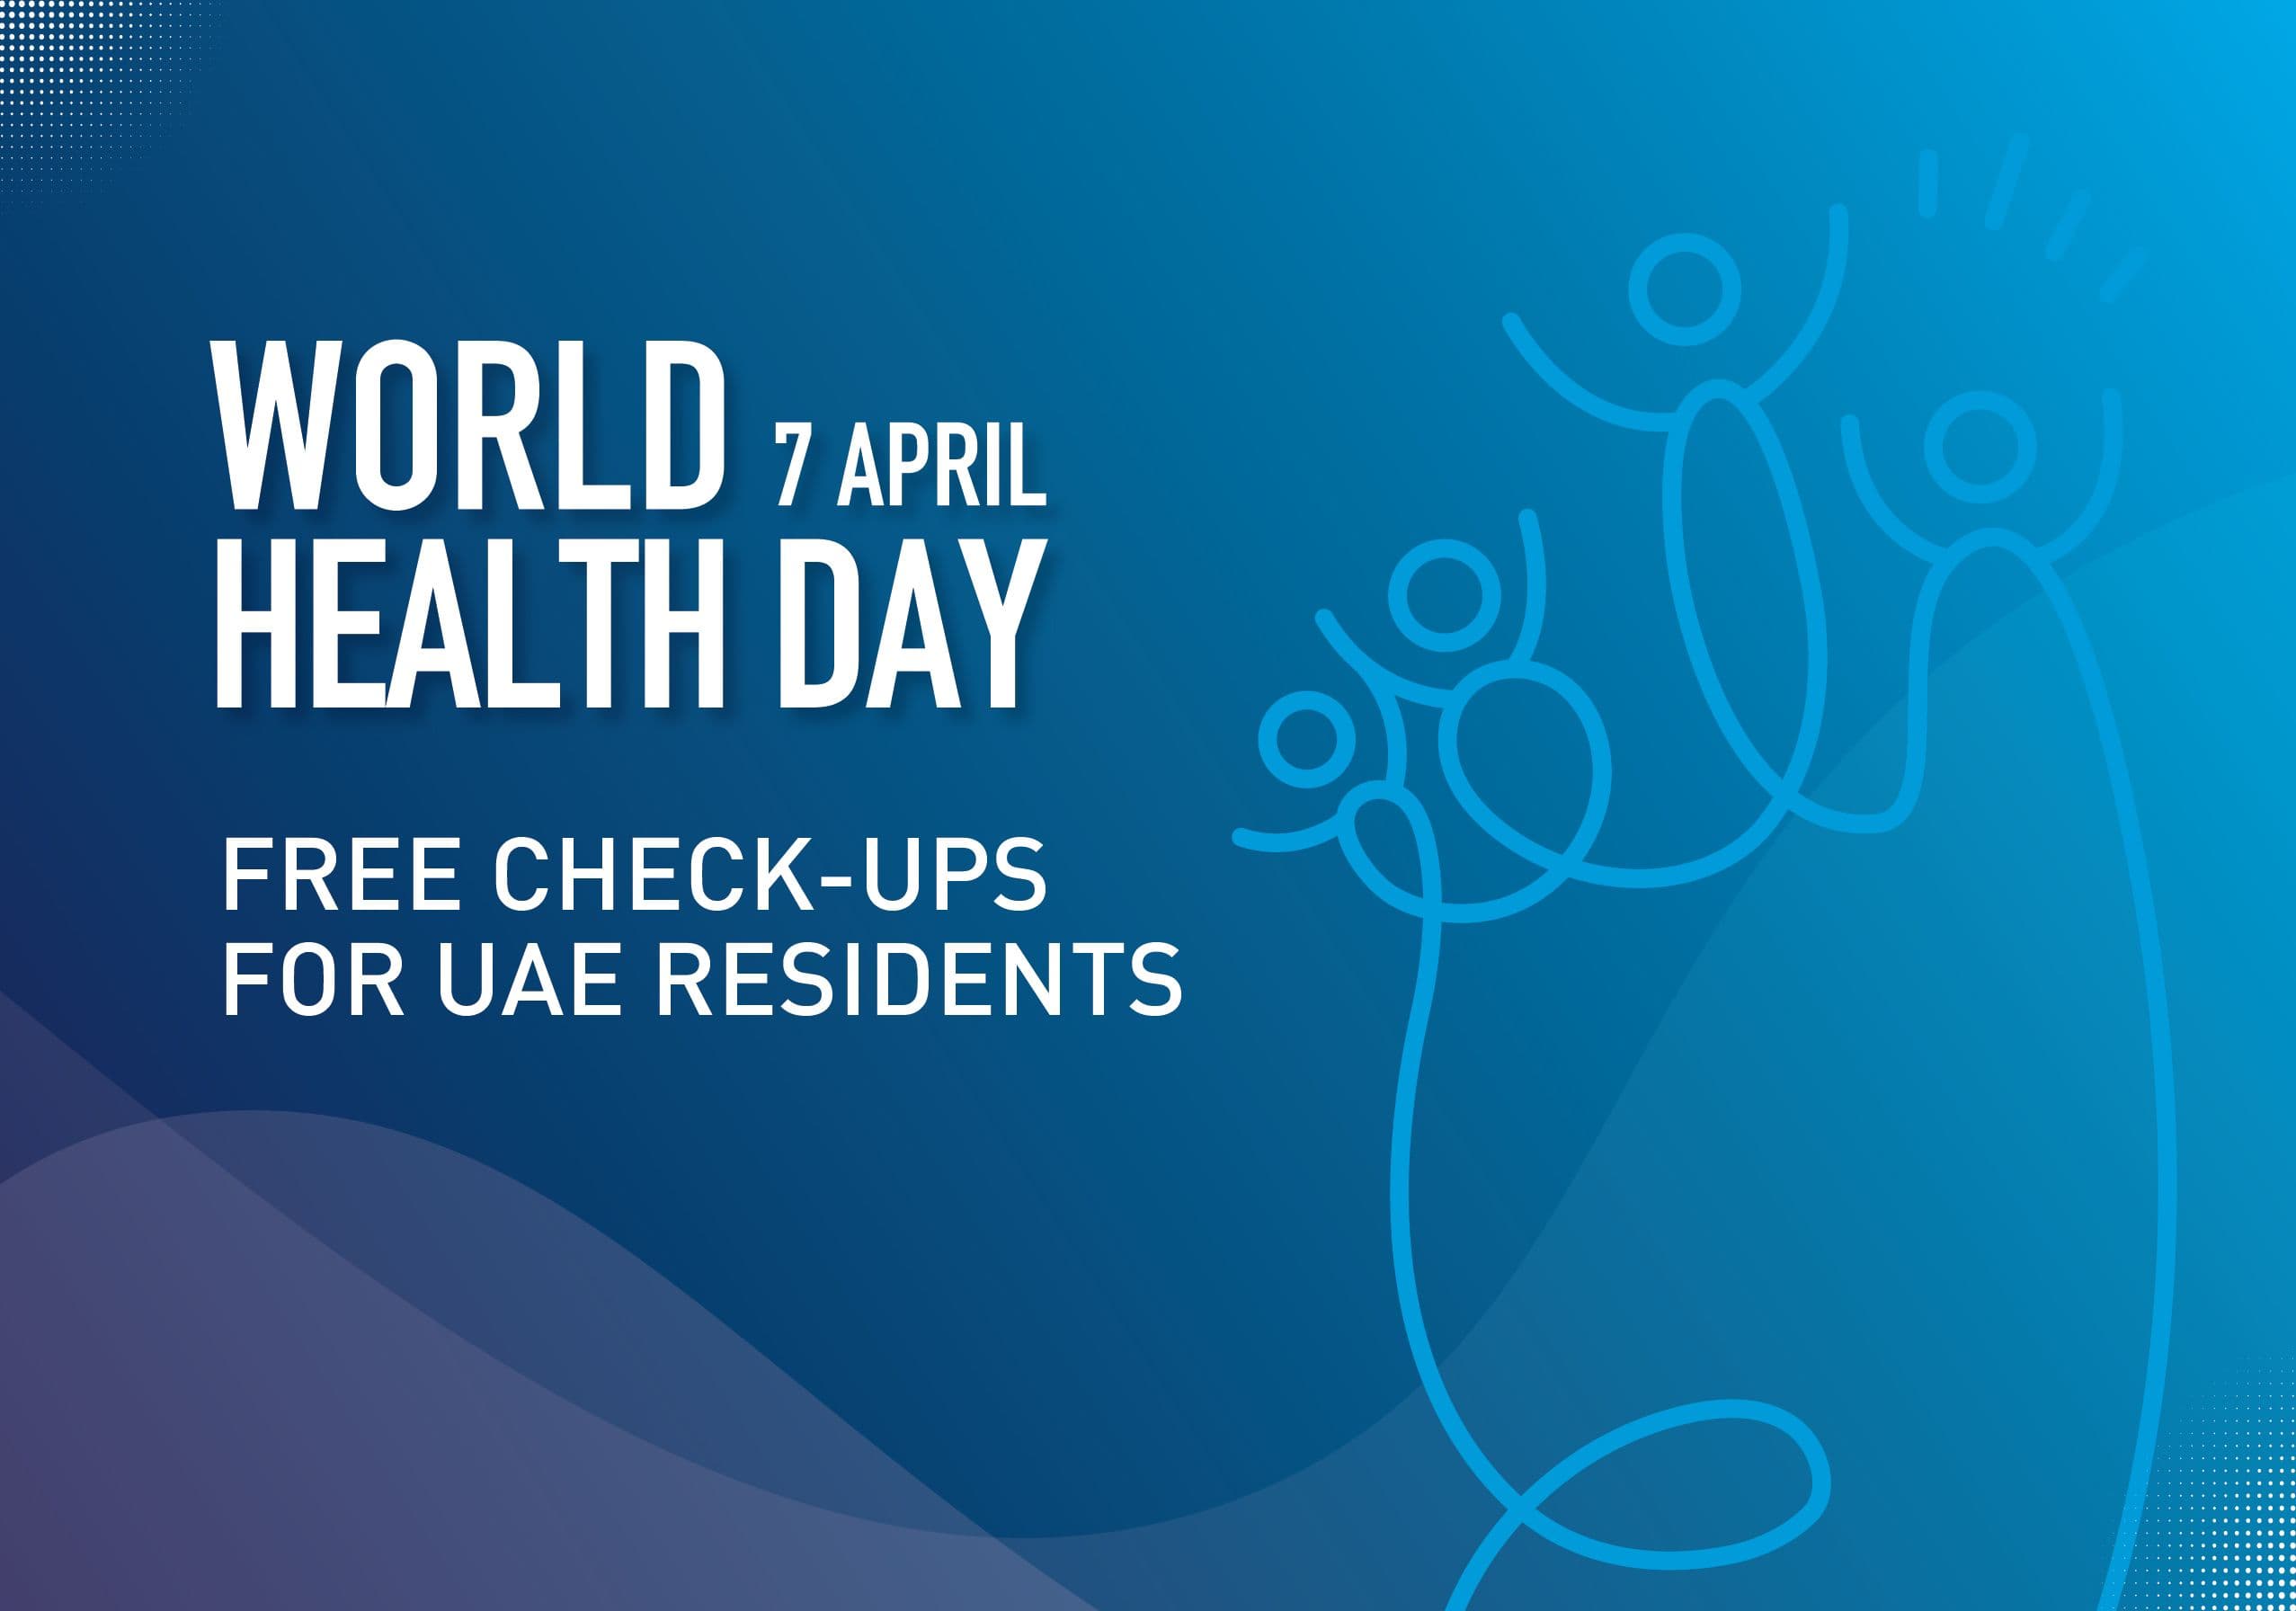 NMC Healthcare Puts Your Health First with Free Health Checks This  World Health Day